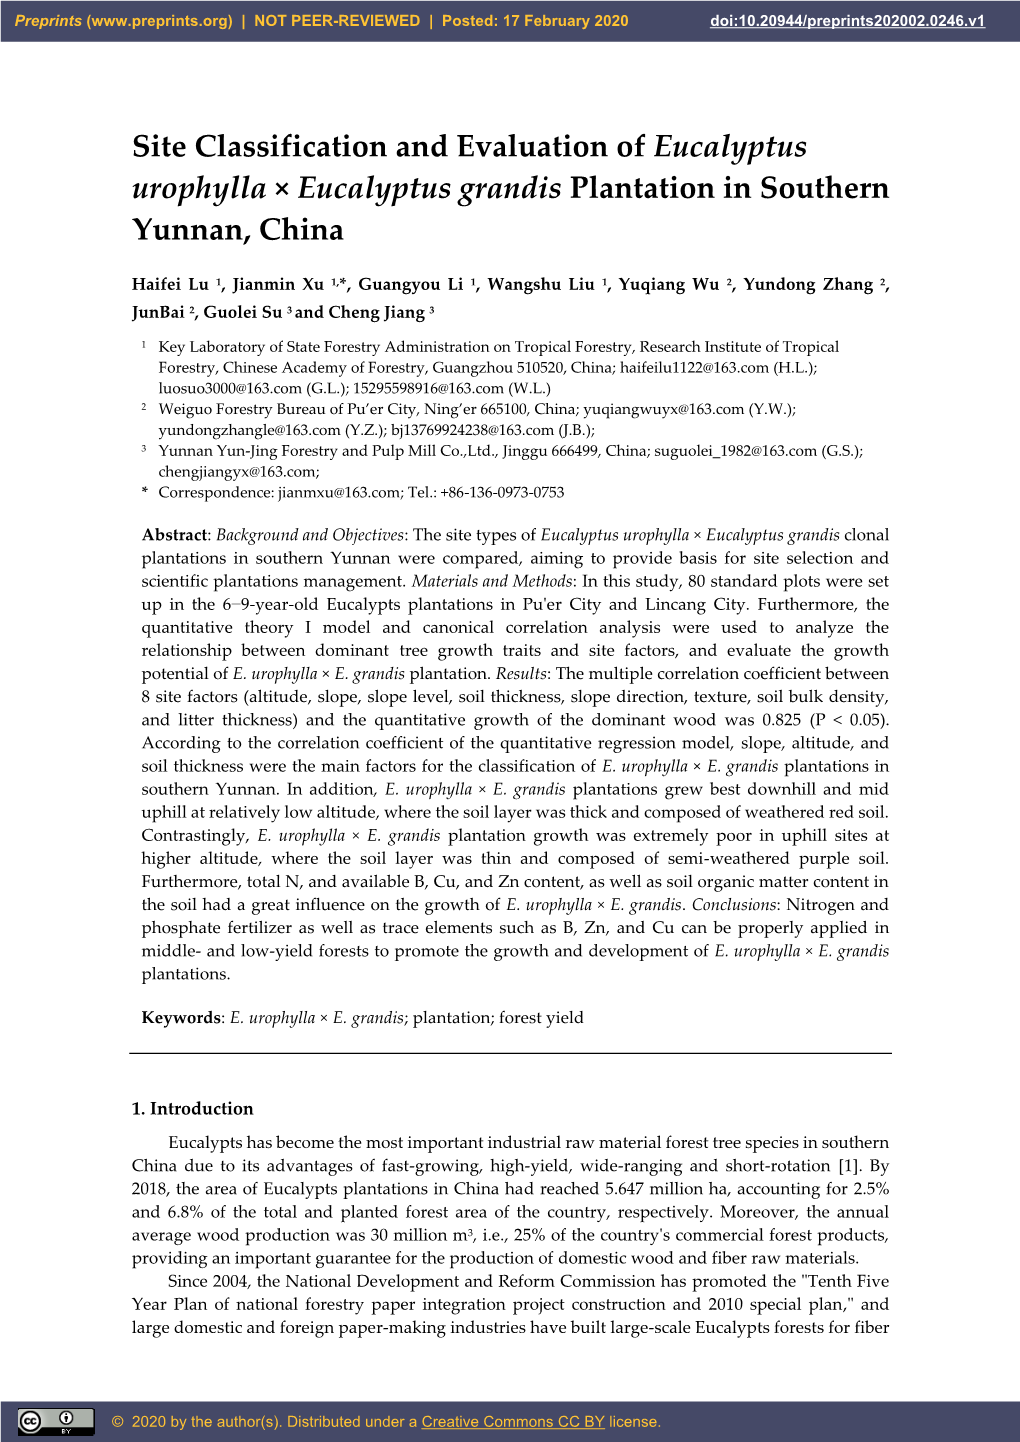 Site Classification and Evaluation of Eucalyptus Urophylla × Eucalyptus Grandis Plantation in Southern Yunnan, China